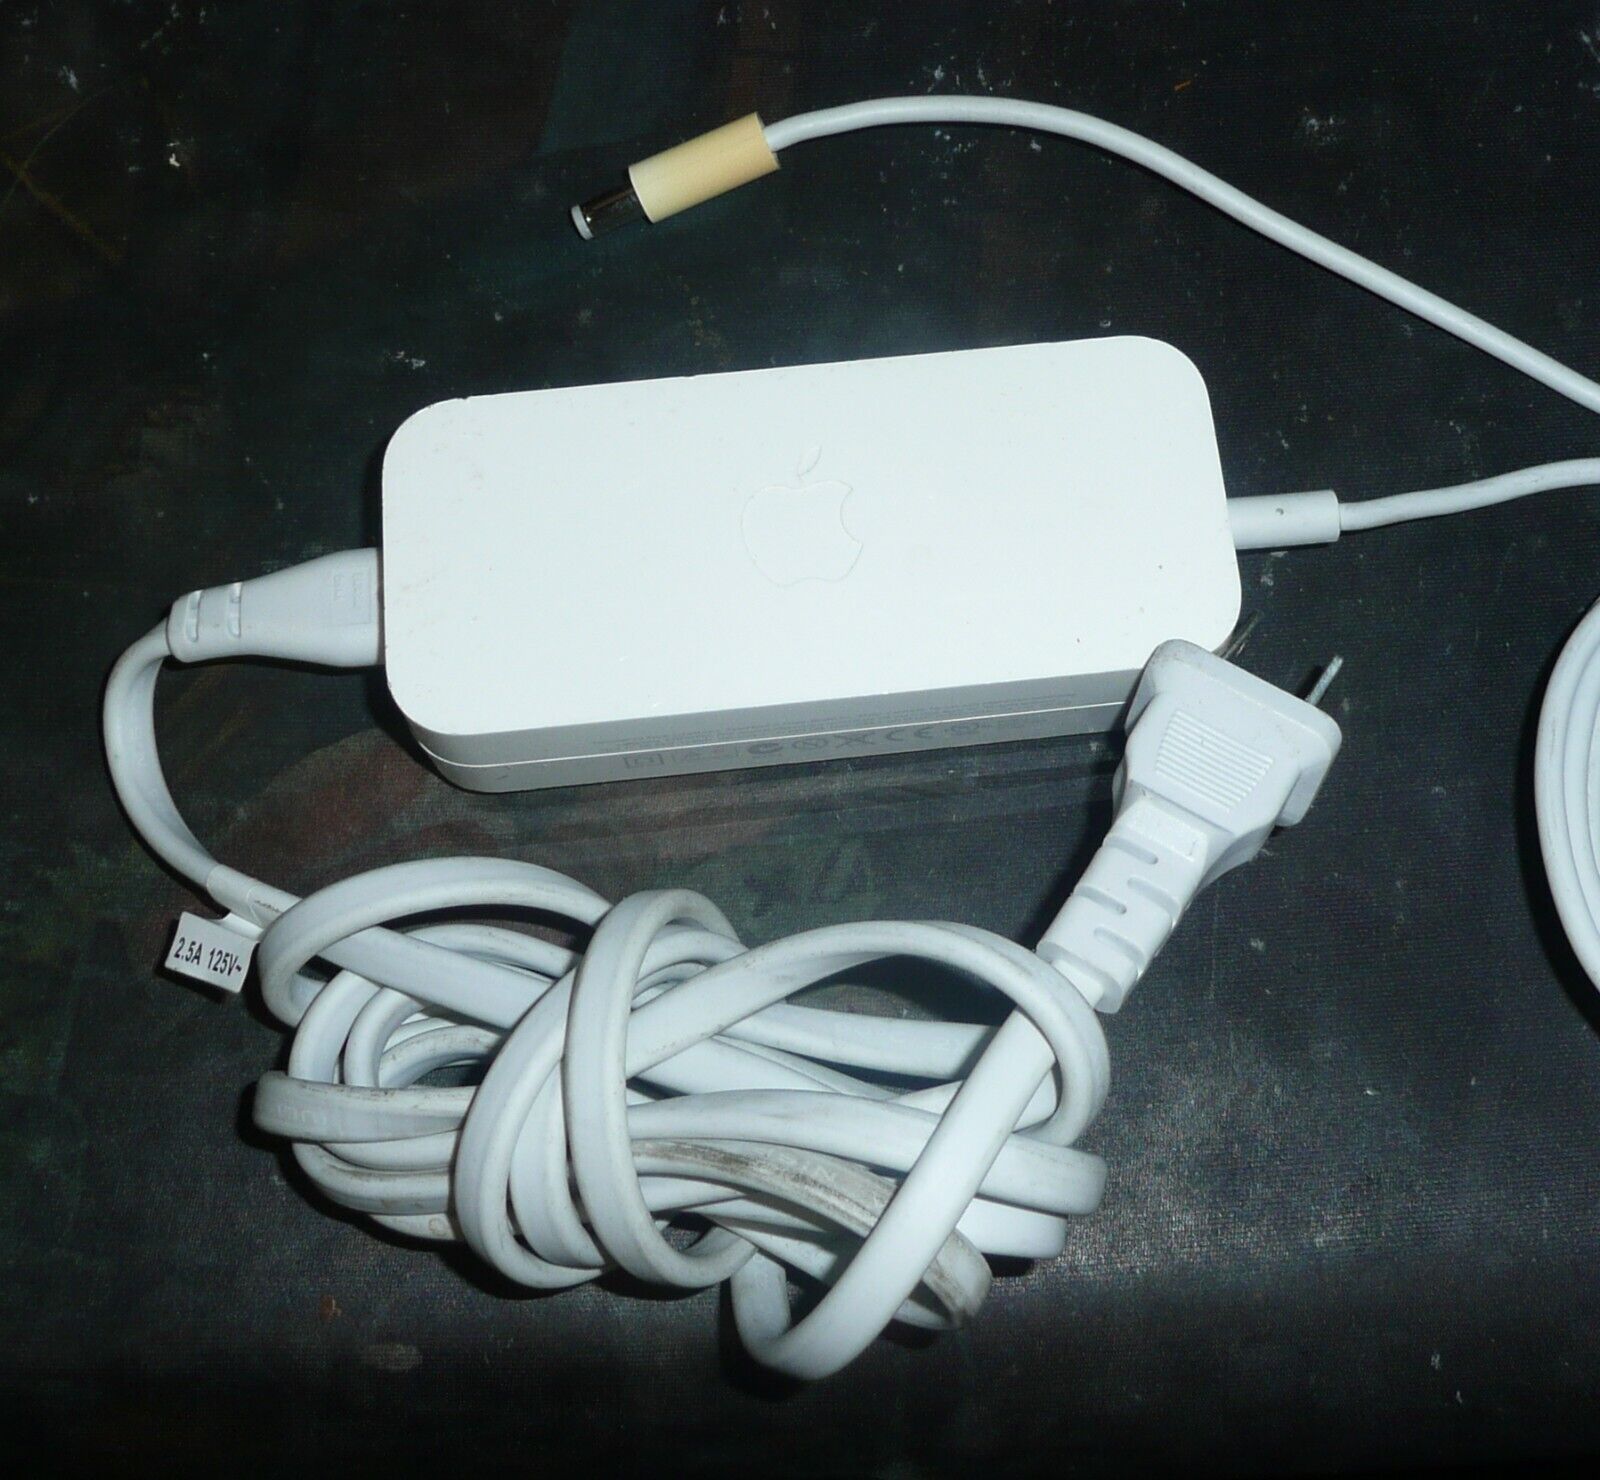 Genuine Apple A1202 Airport Extreme Base Station Charger AC adapter 12V 1.8A